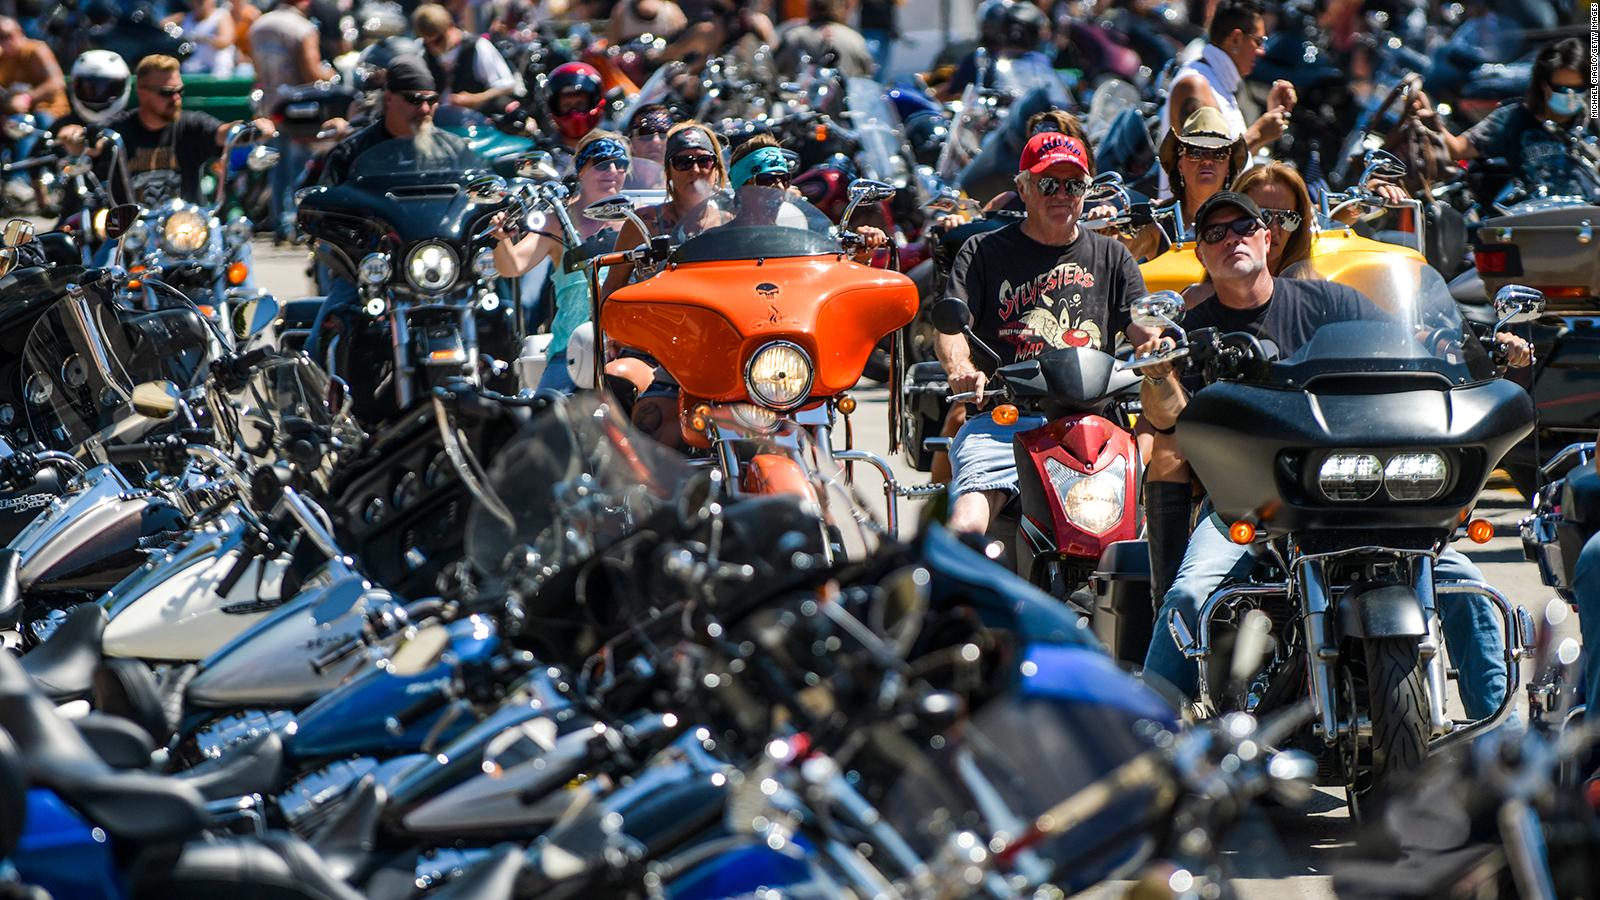 Sturgis Motorcycle Rally: A 'cautionary tale' in the age of Covid-19 - CNN